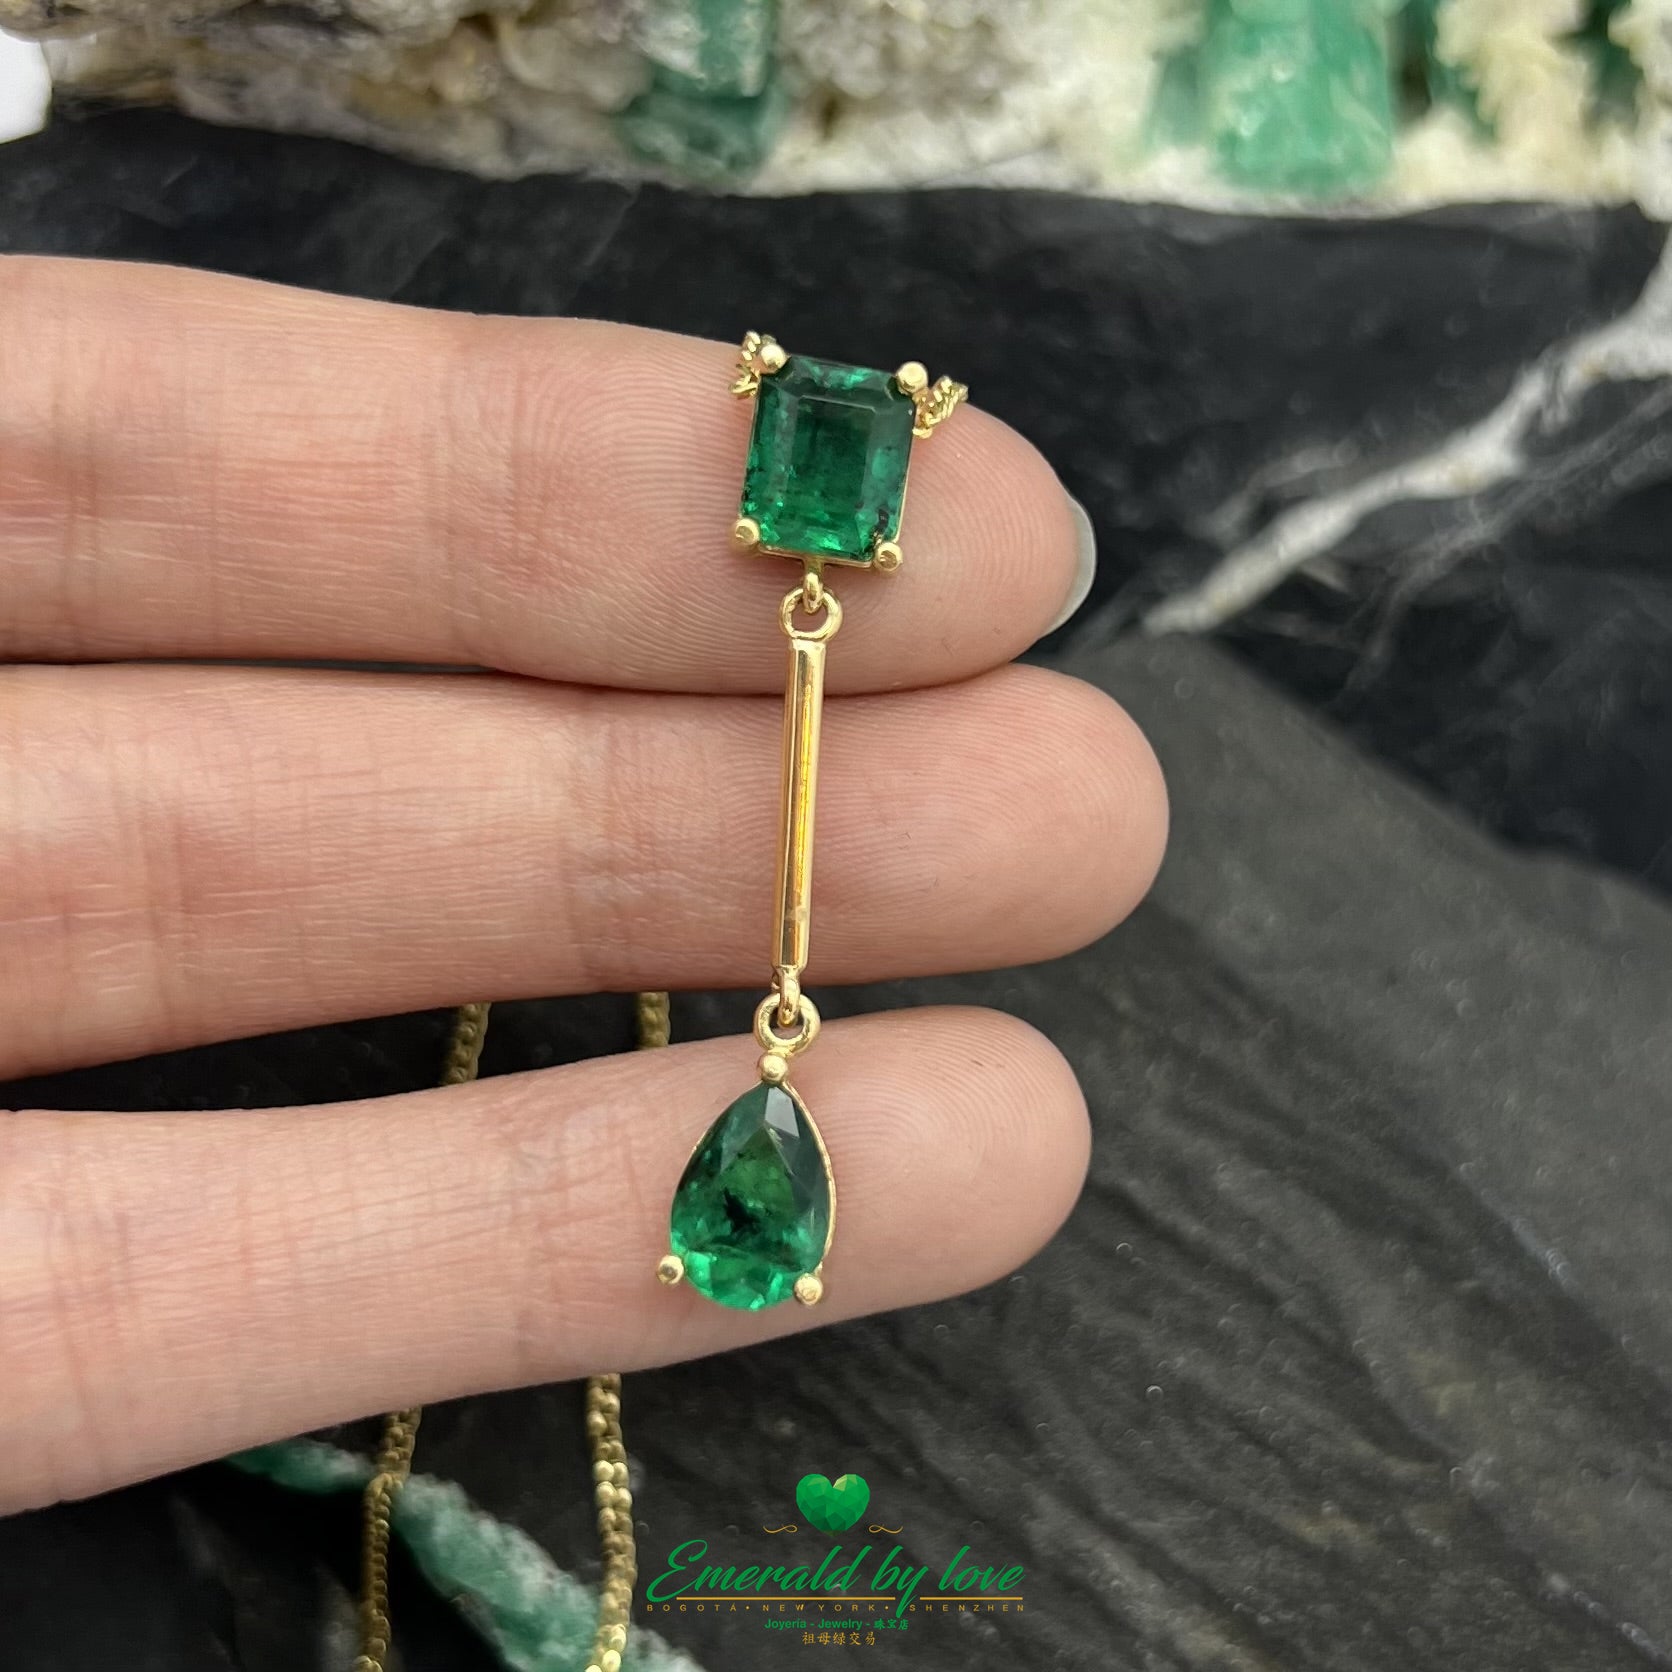 Long 18k Yellow Gold Pear and Square Emerald Pendant